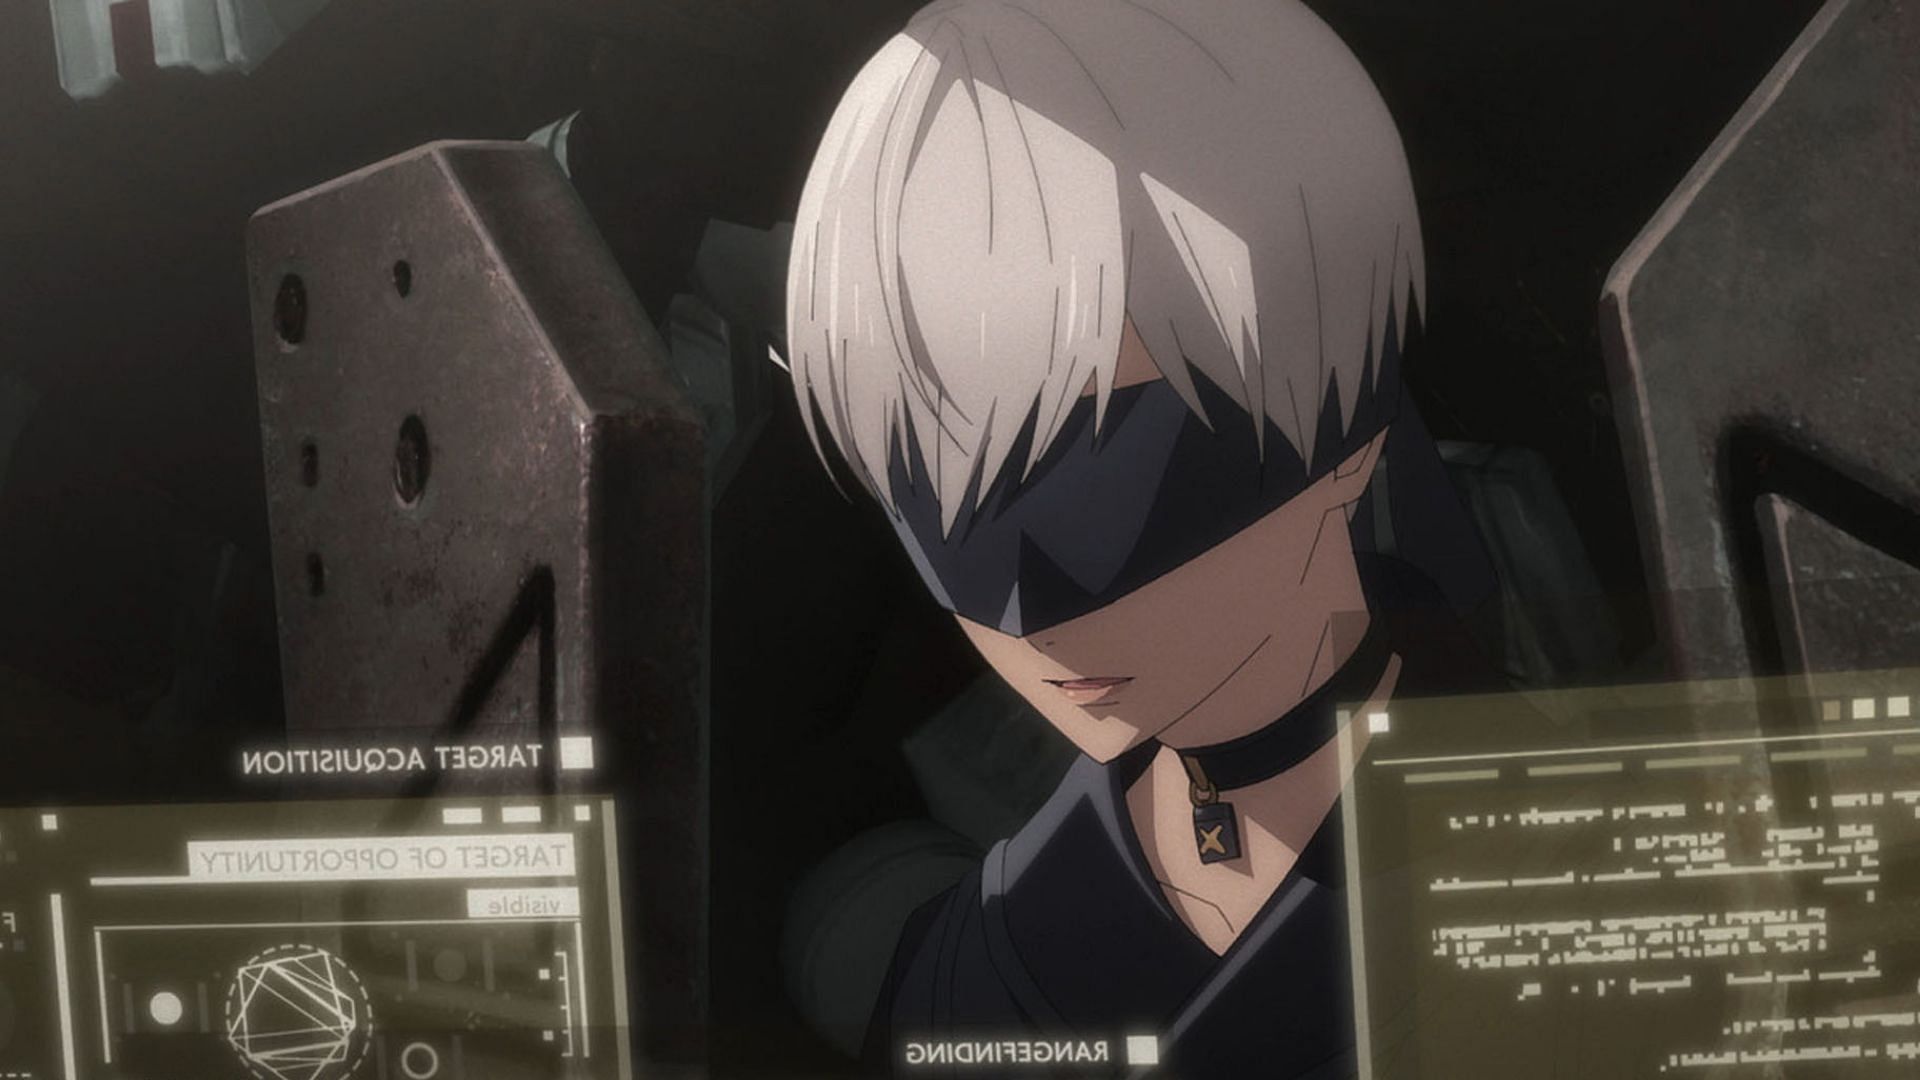 9S as seen in NieR Automata: Ver1.1a episode 1 preview (Image via A-1 Pictures)